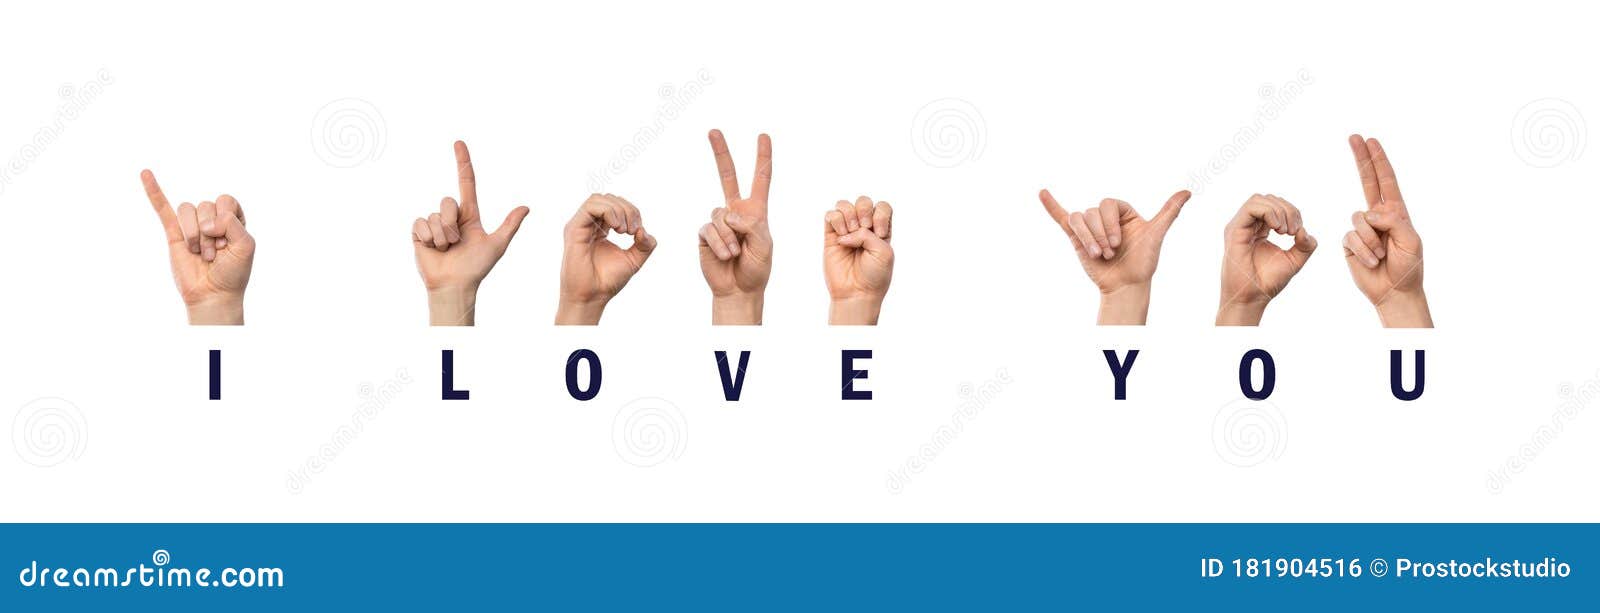 I Love You Finger Spelling In American Sign Language Asl Stock Photo Image Of Letters International